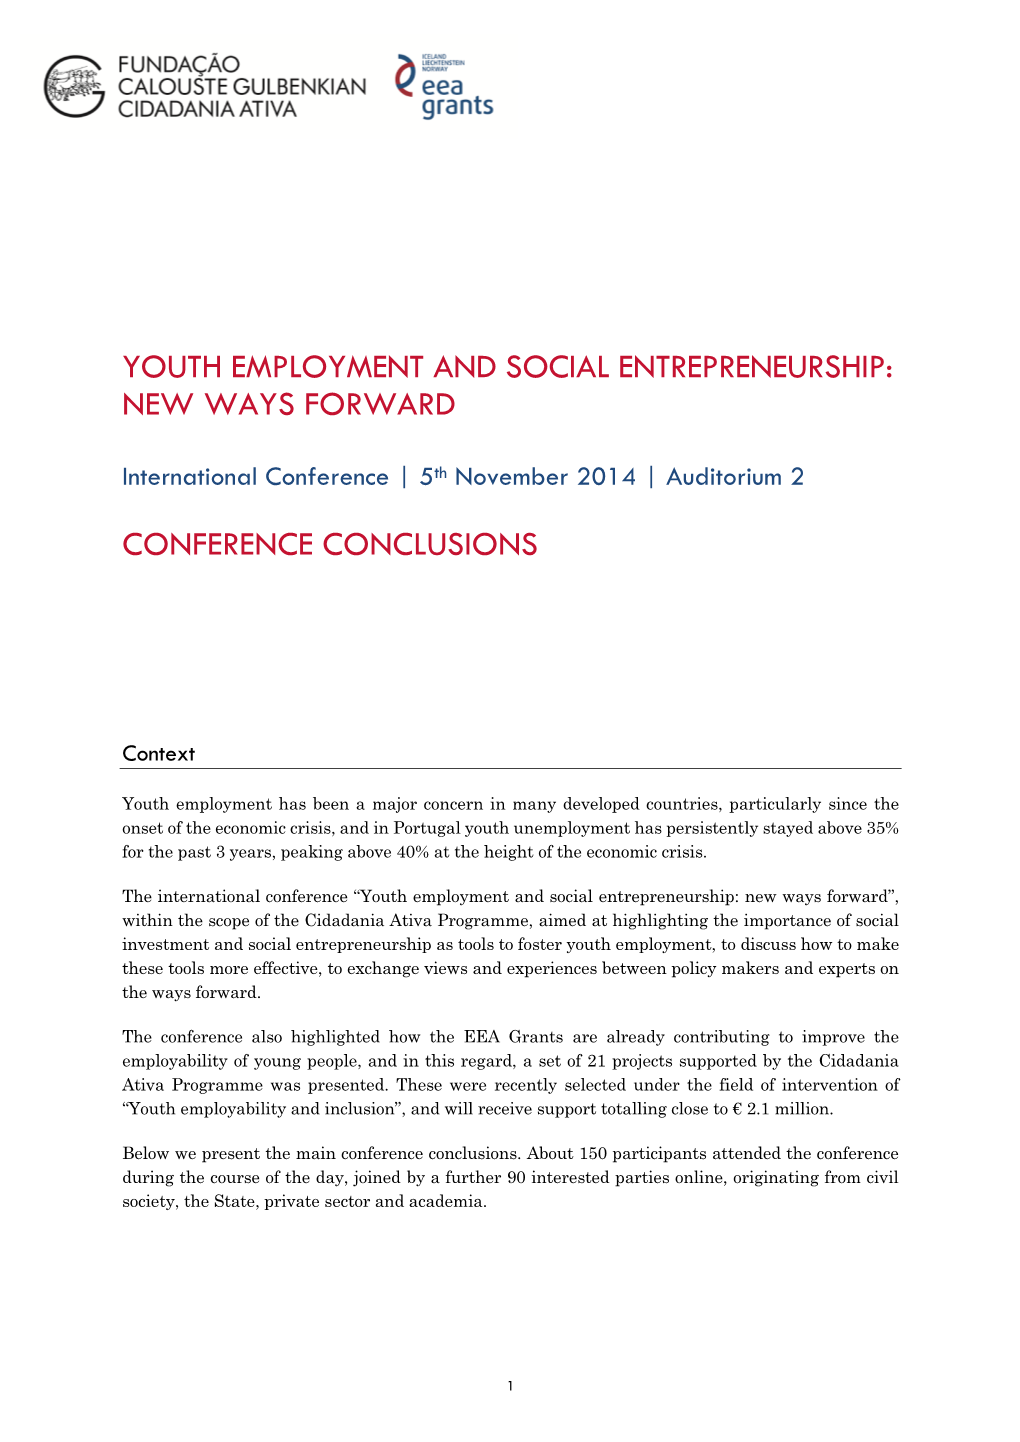 New Ways Forward Conference Conclusions